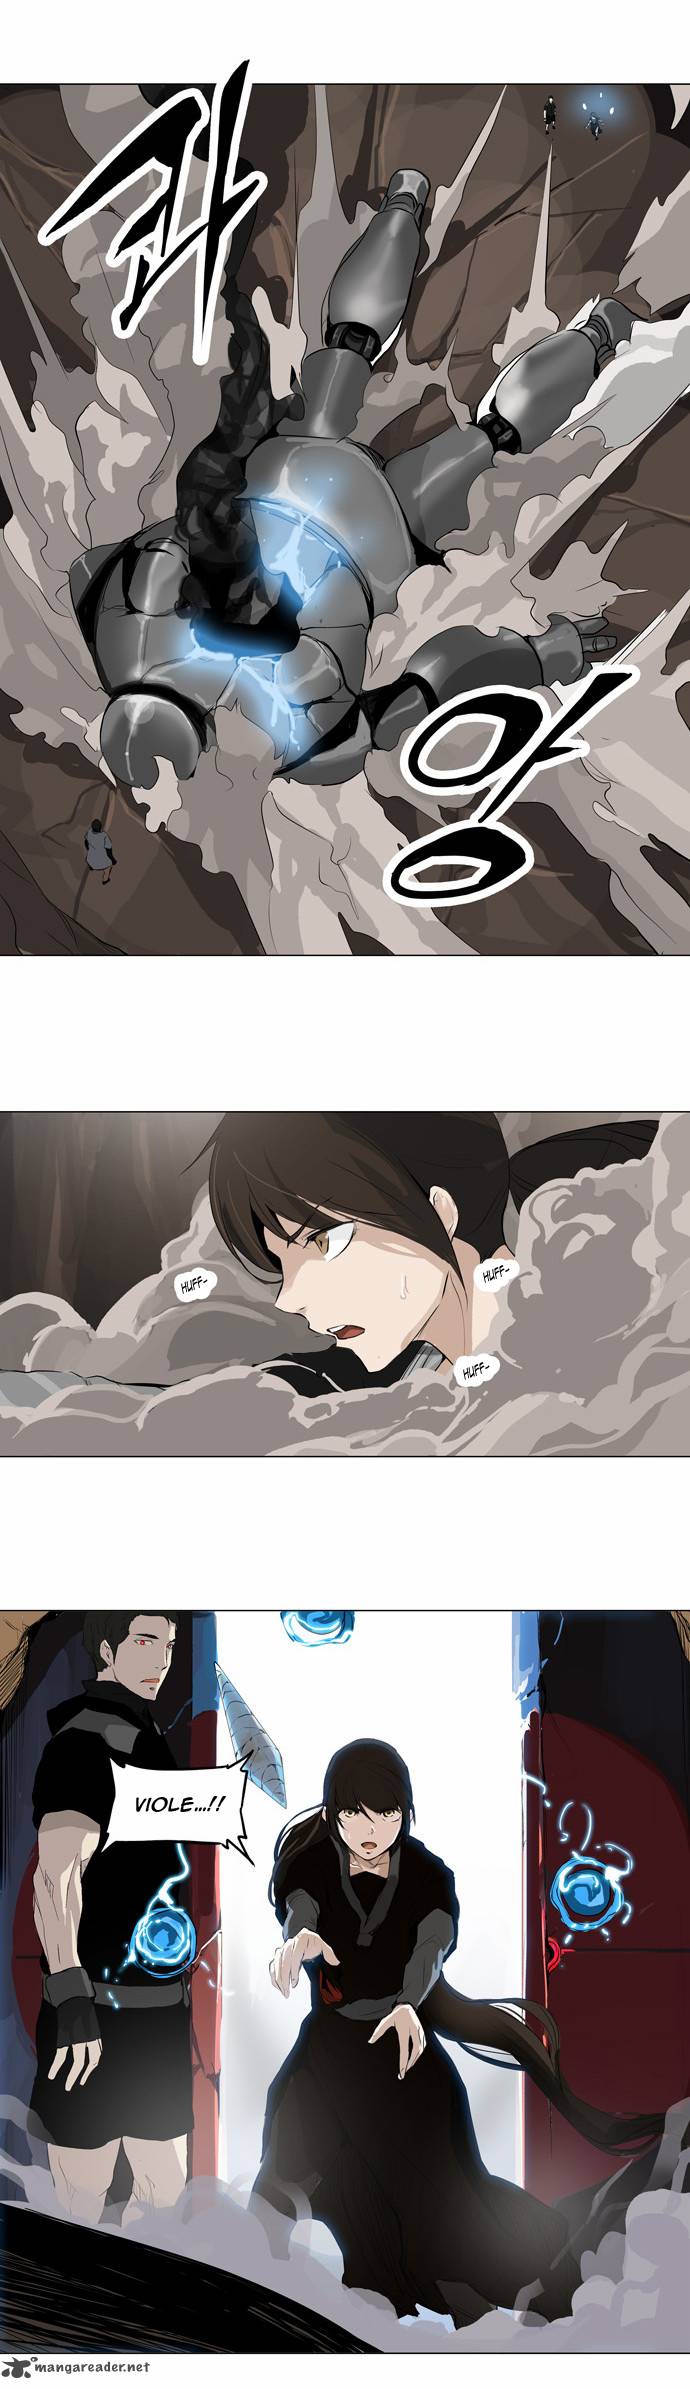 Tower Of God 170 24